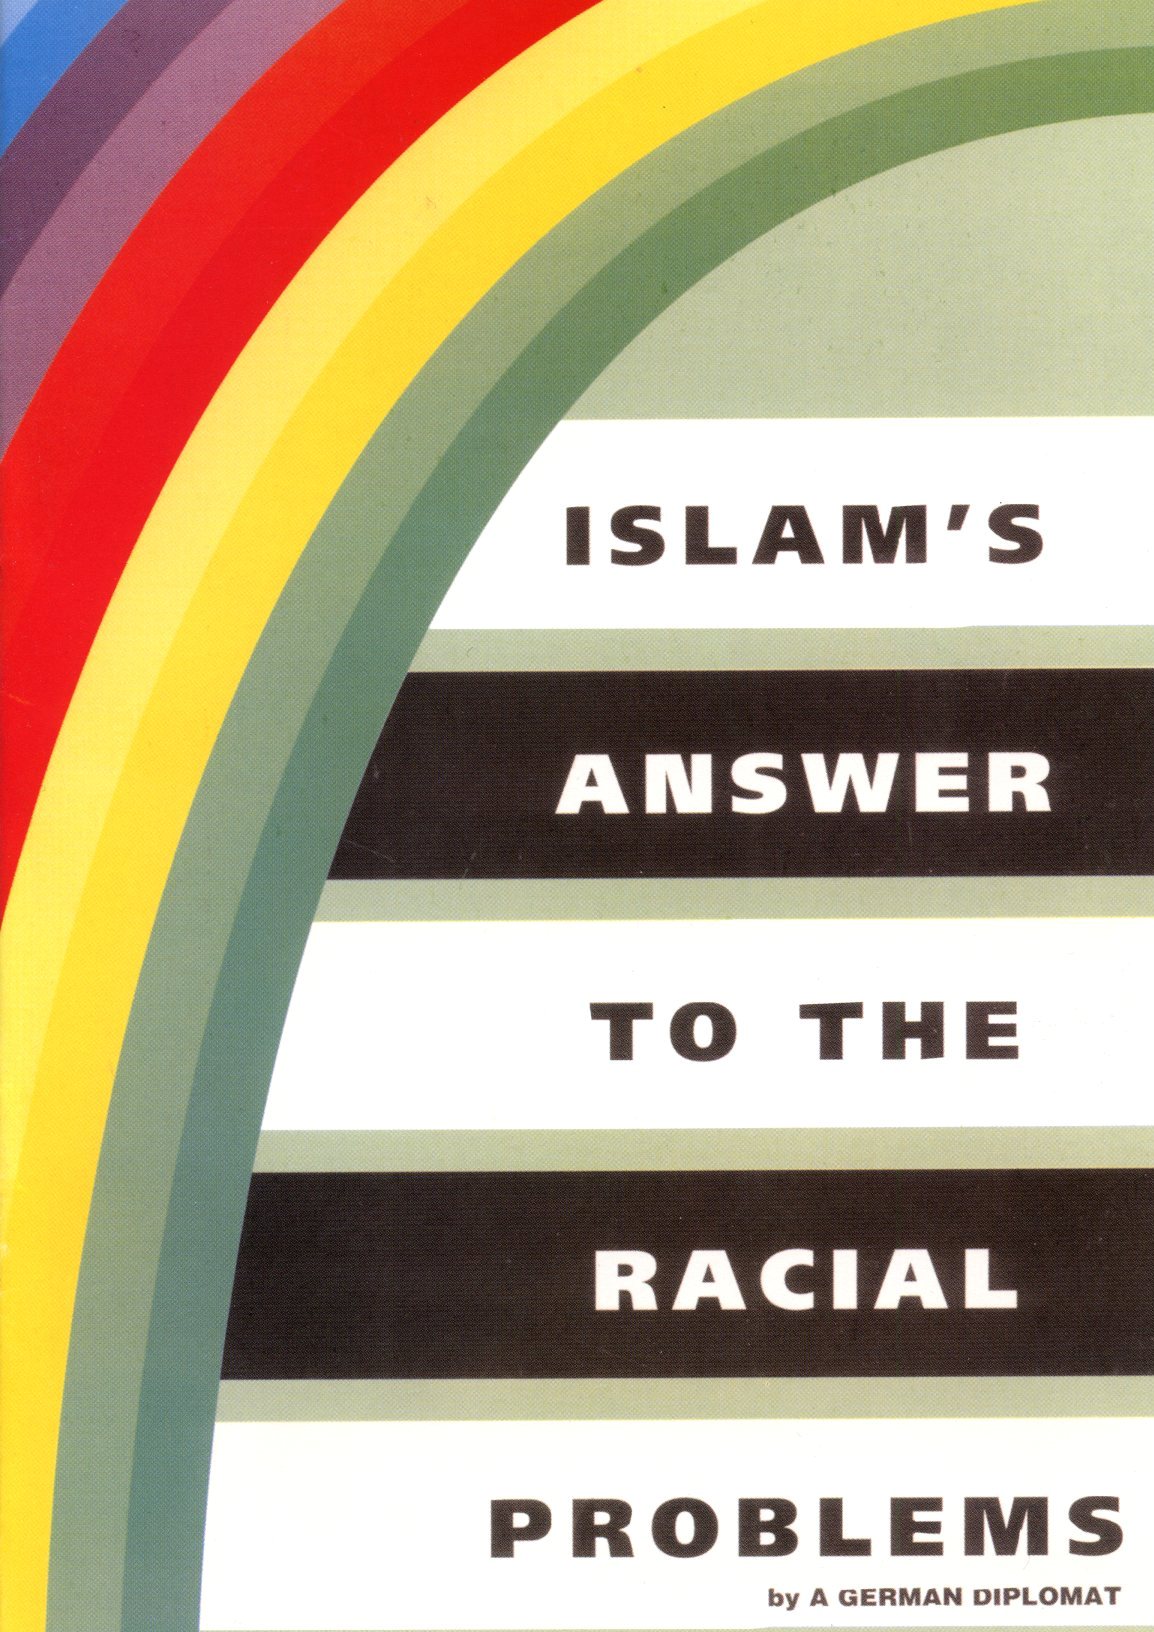 Islam's Answer to the Racial Problems